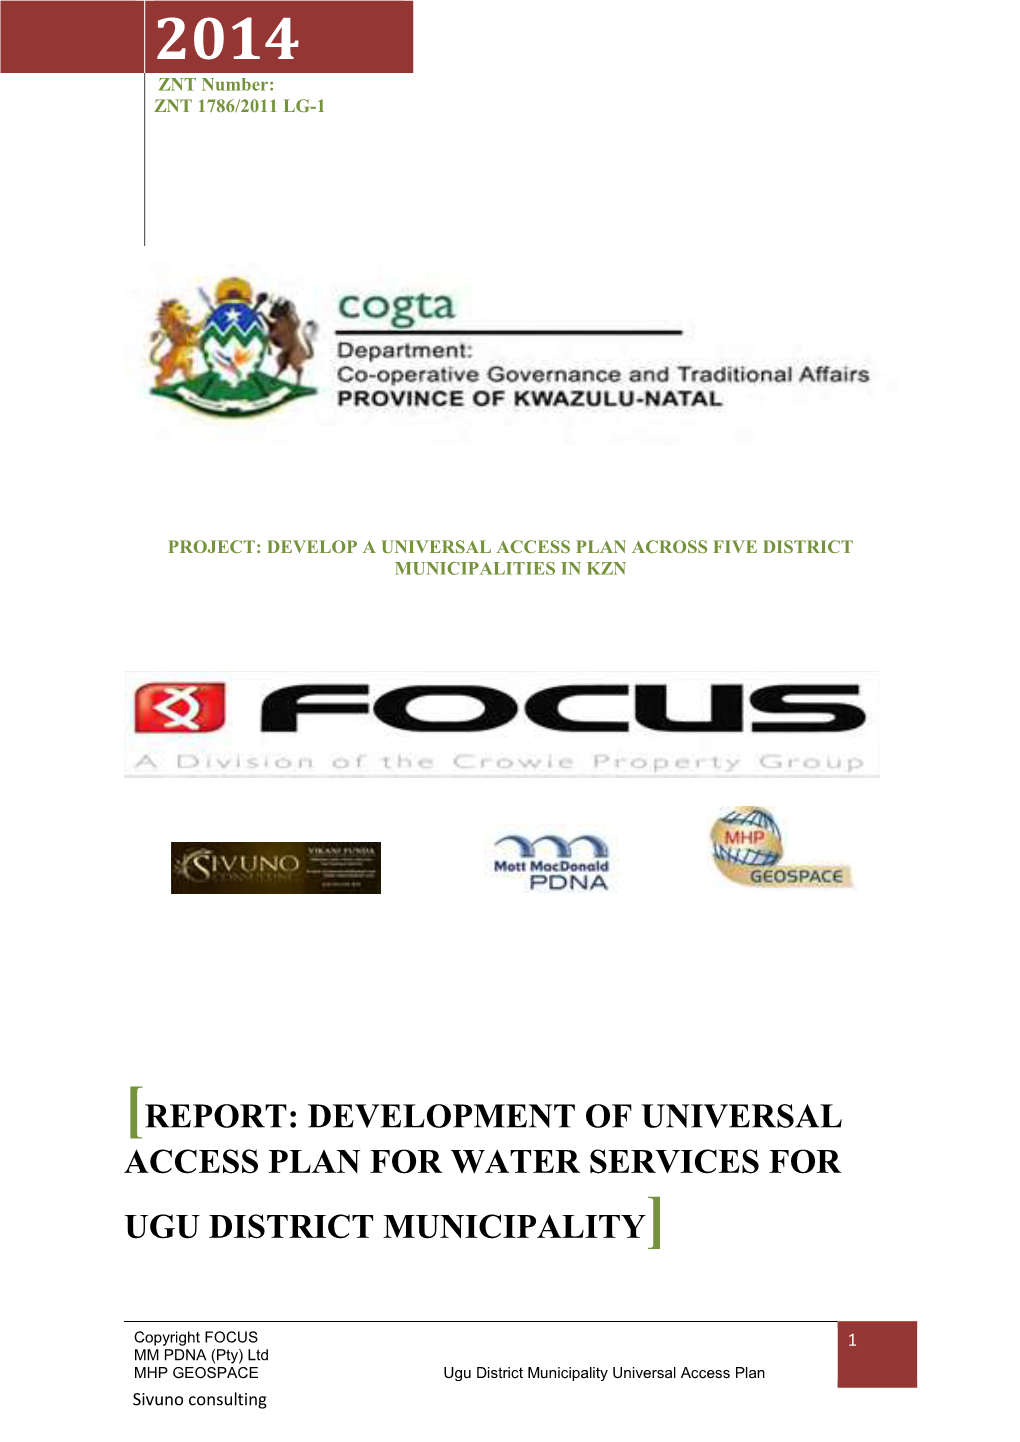 Report: Development of Universal Access Plan for Water Services for Ugu District Municipality]